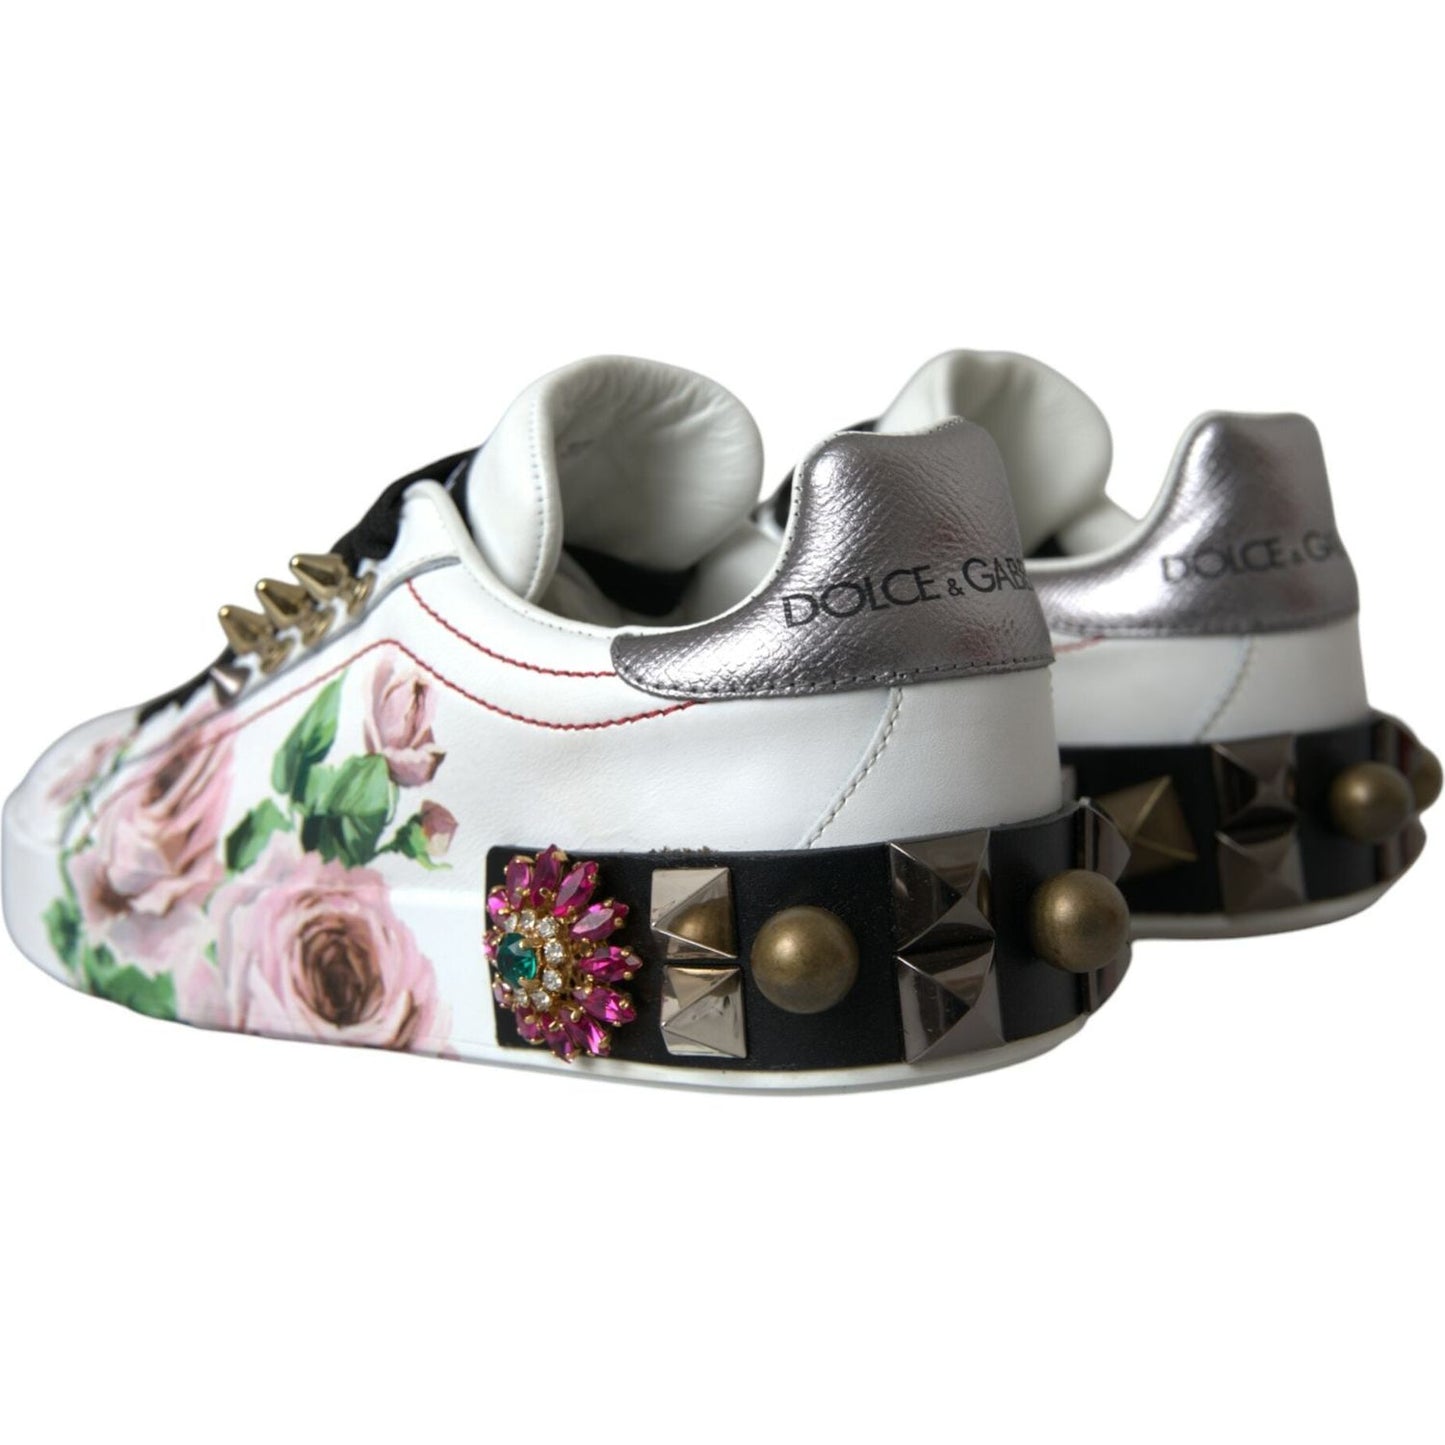 Dolce & Gabbana White Leather Crystal Roses Floral Sneakers Shoes white-leather-crystal-roses-floral-sneakers-shoes-1